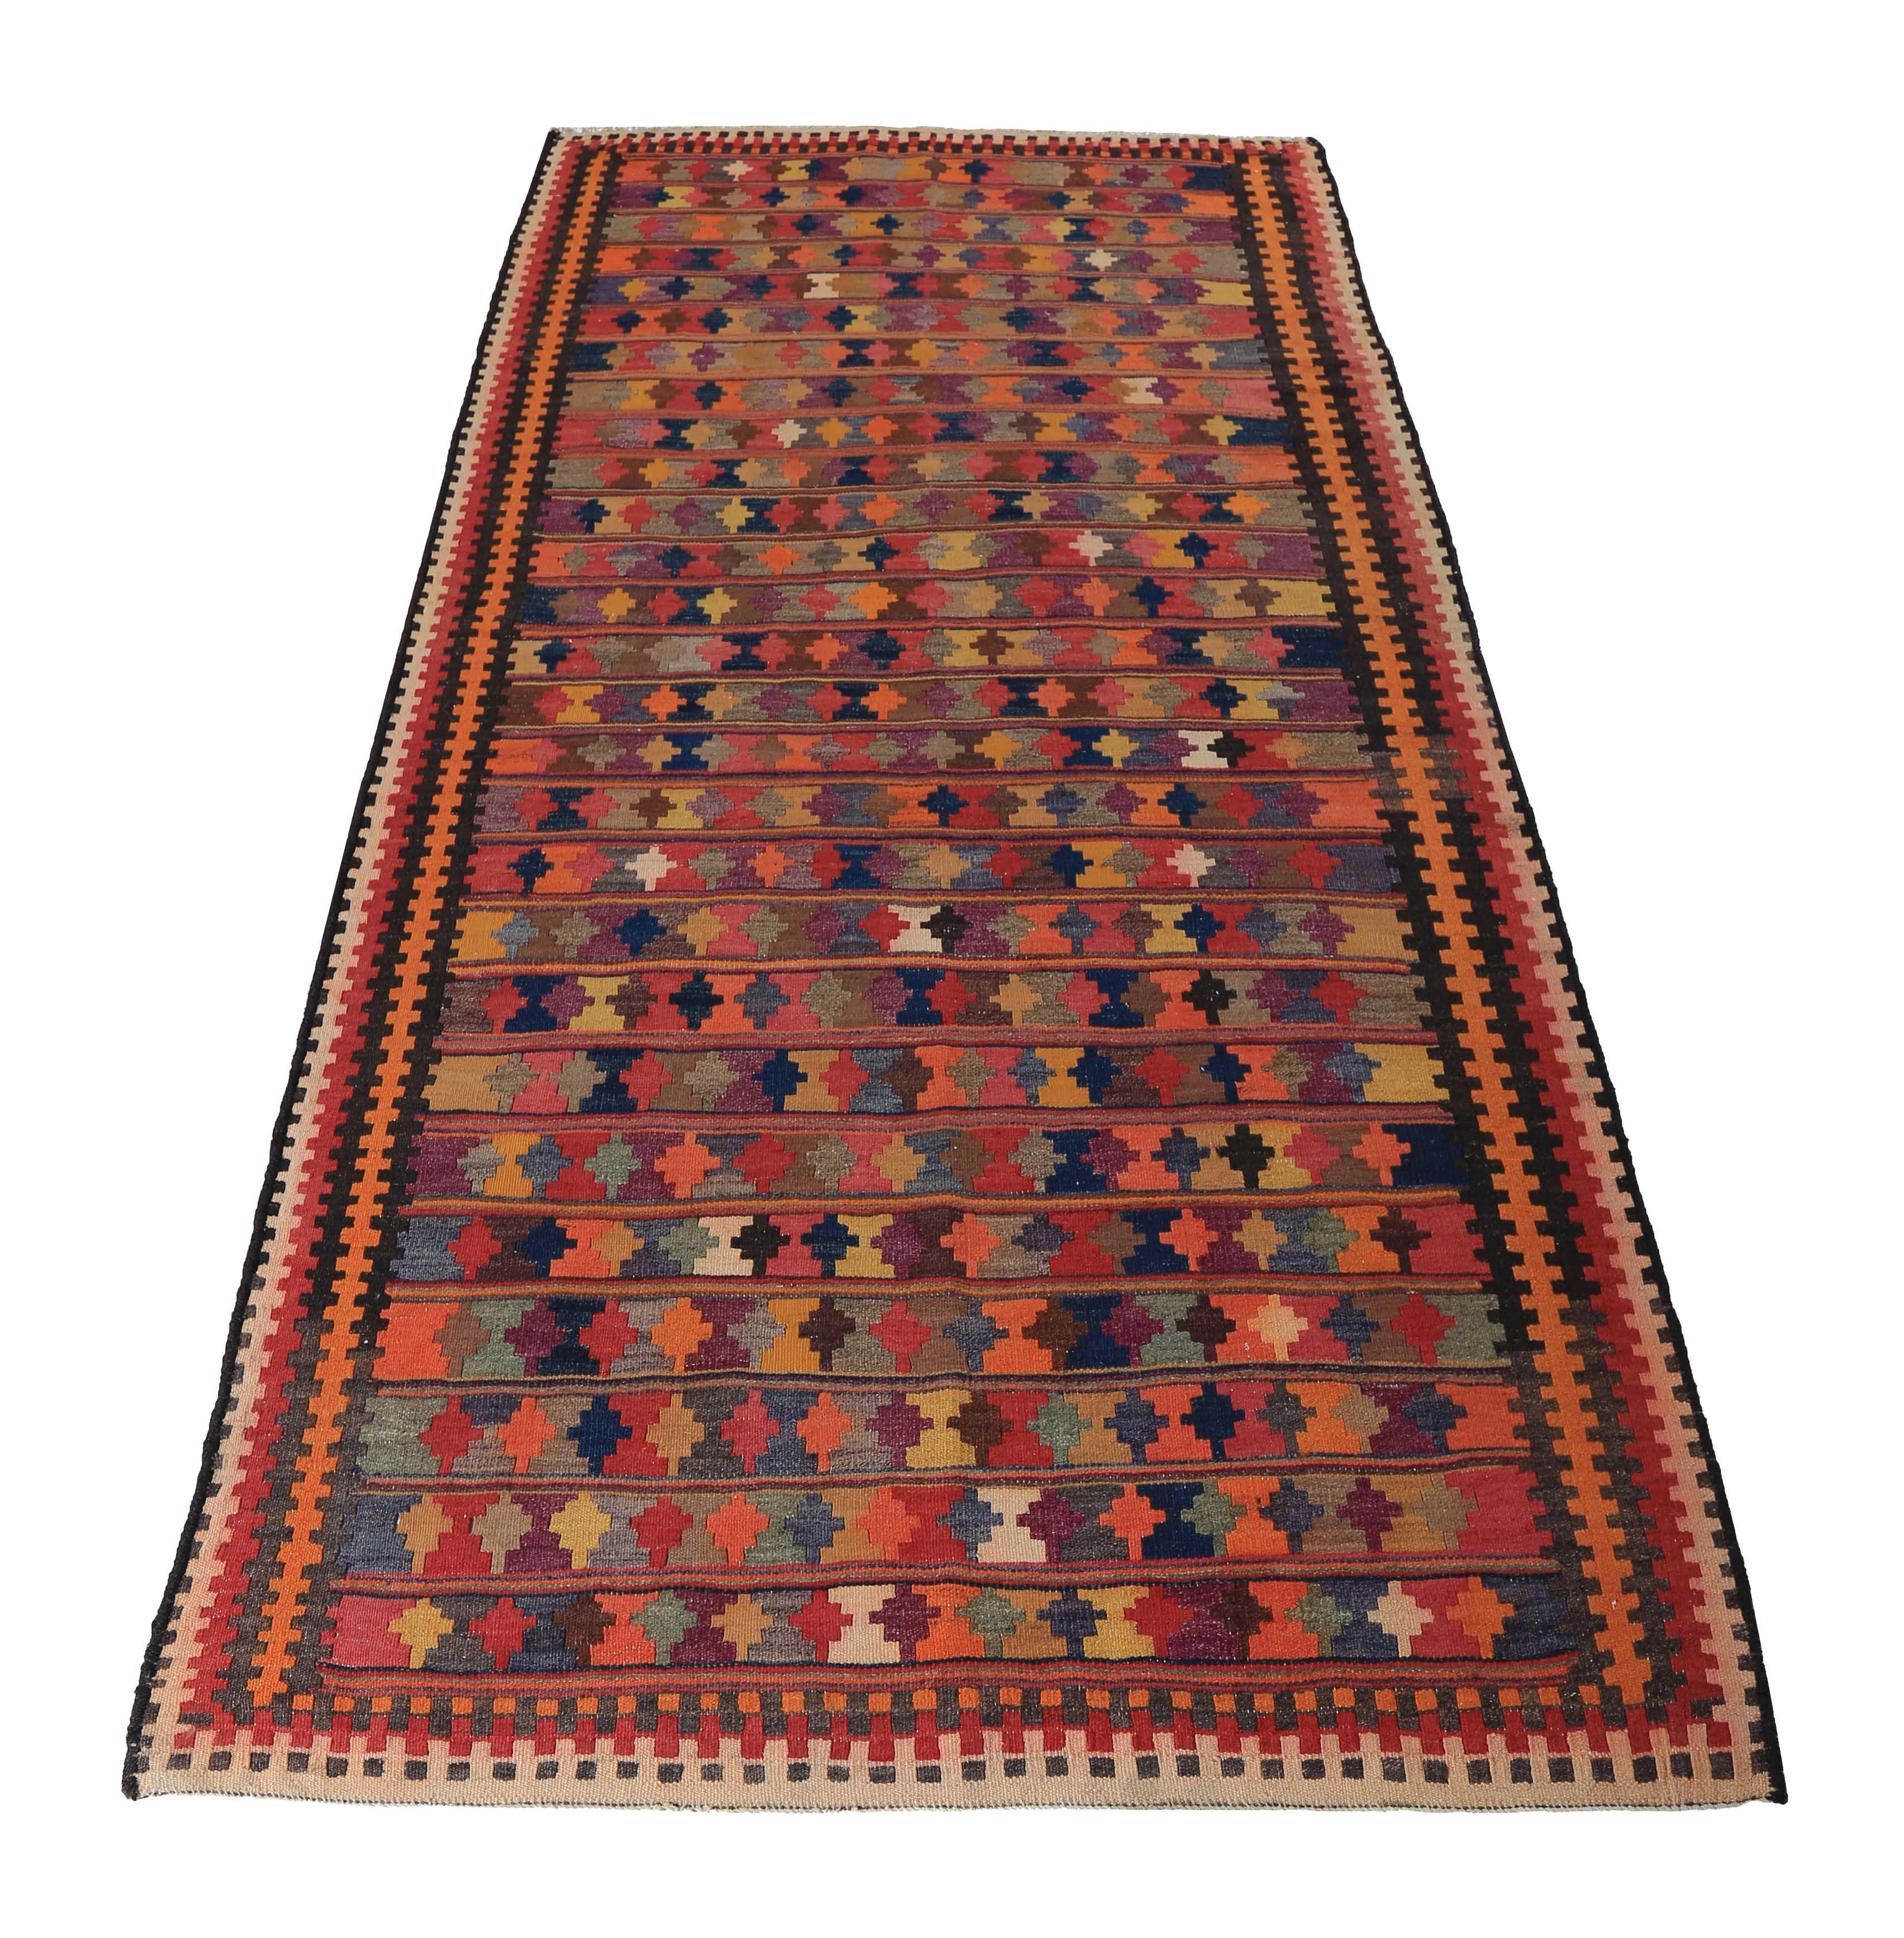 Turkish rug handwoven from the finest sheep’s wool and colored with all-natural vegetable dyes that are safe for humans and pets. It’s a traditional Kilim flat-weave design featuring a colorful mix of geometric and tribal details. It’s a stunning